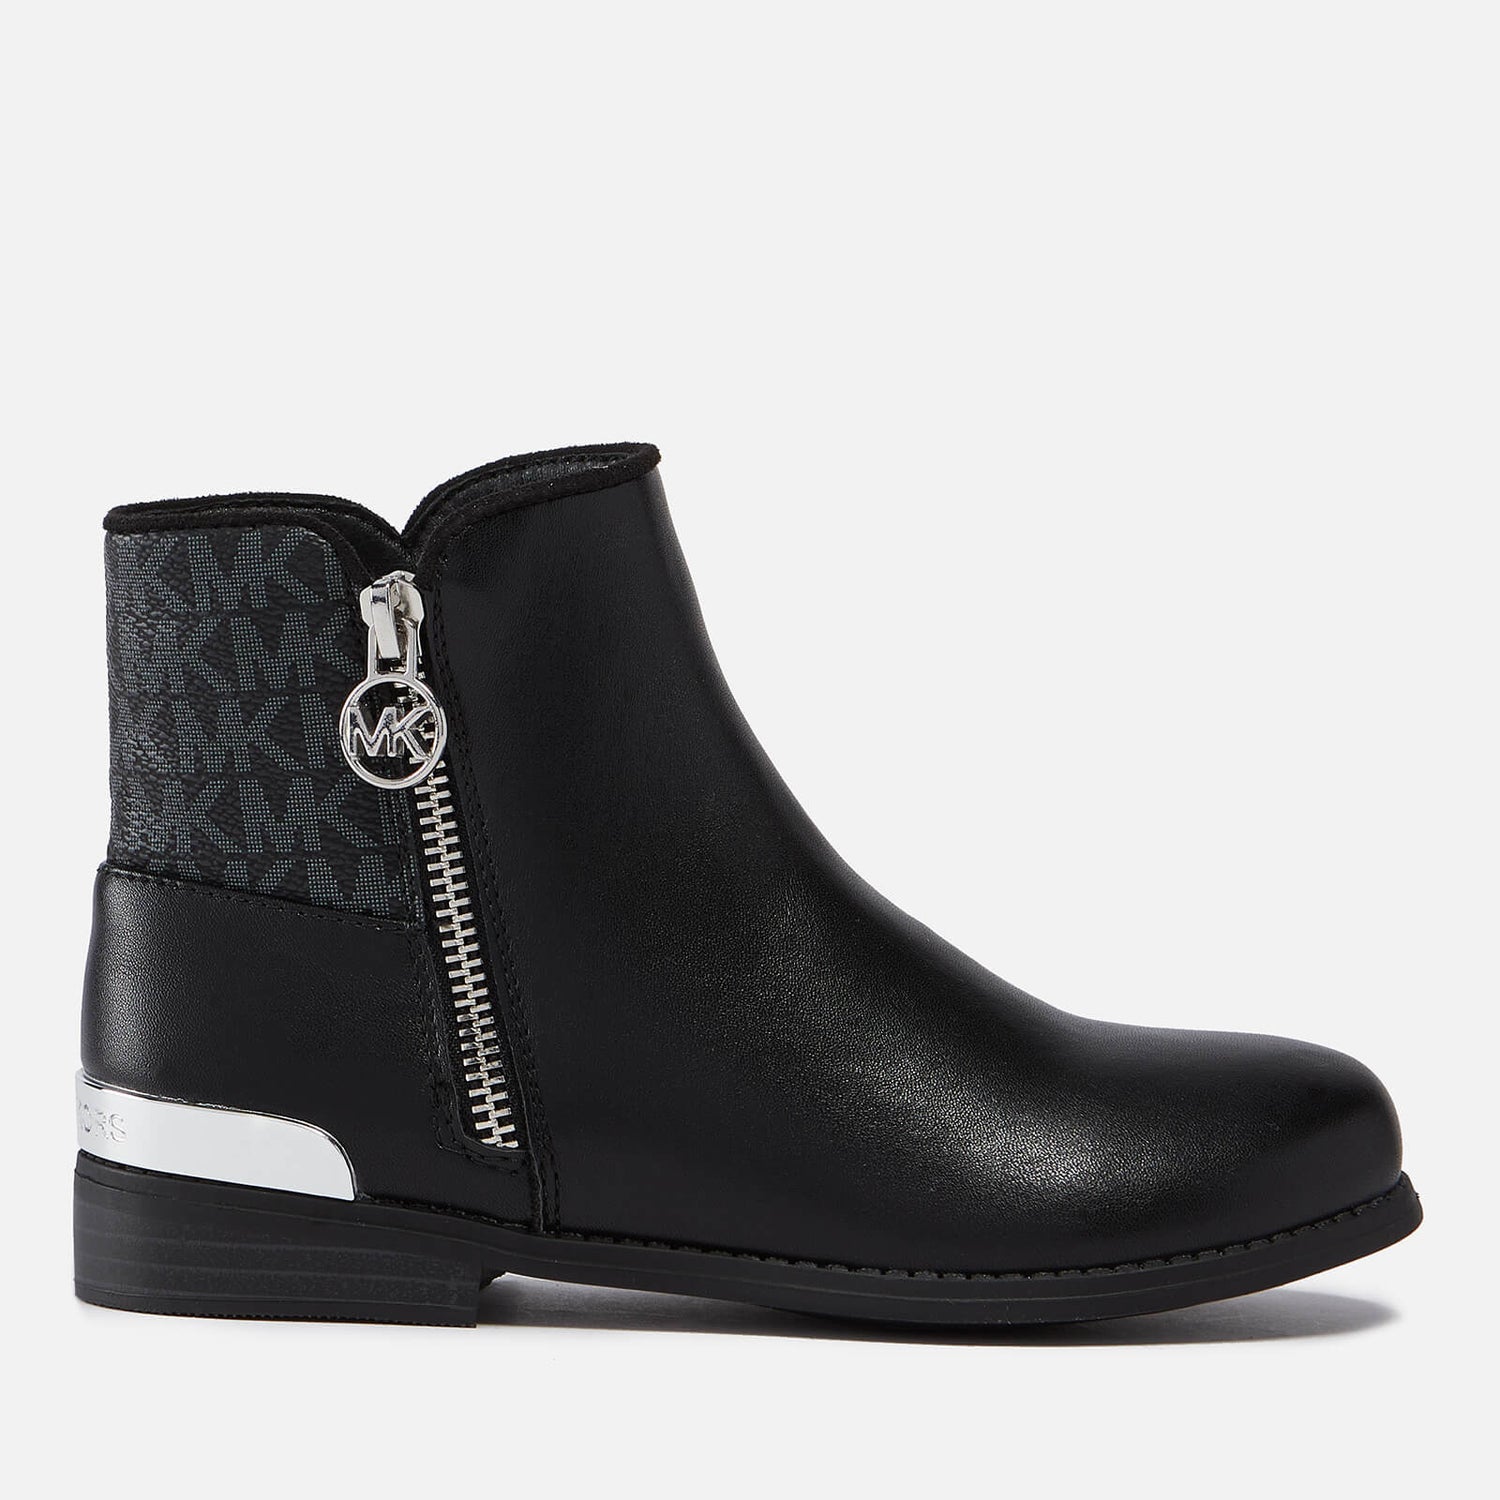 Michael Kors Girls’ Emma Theodora Faux Leather Ankle Boots